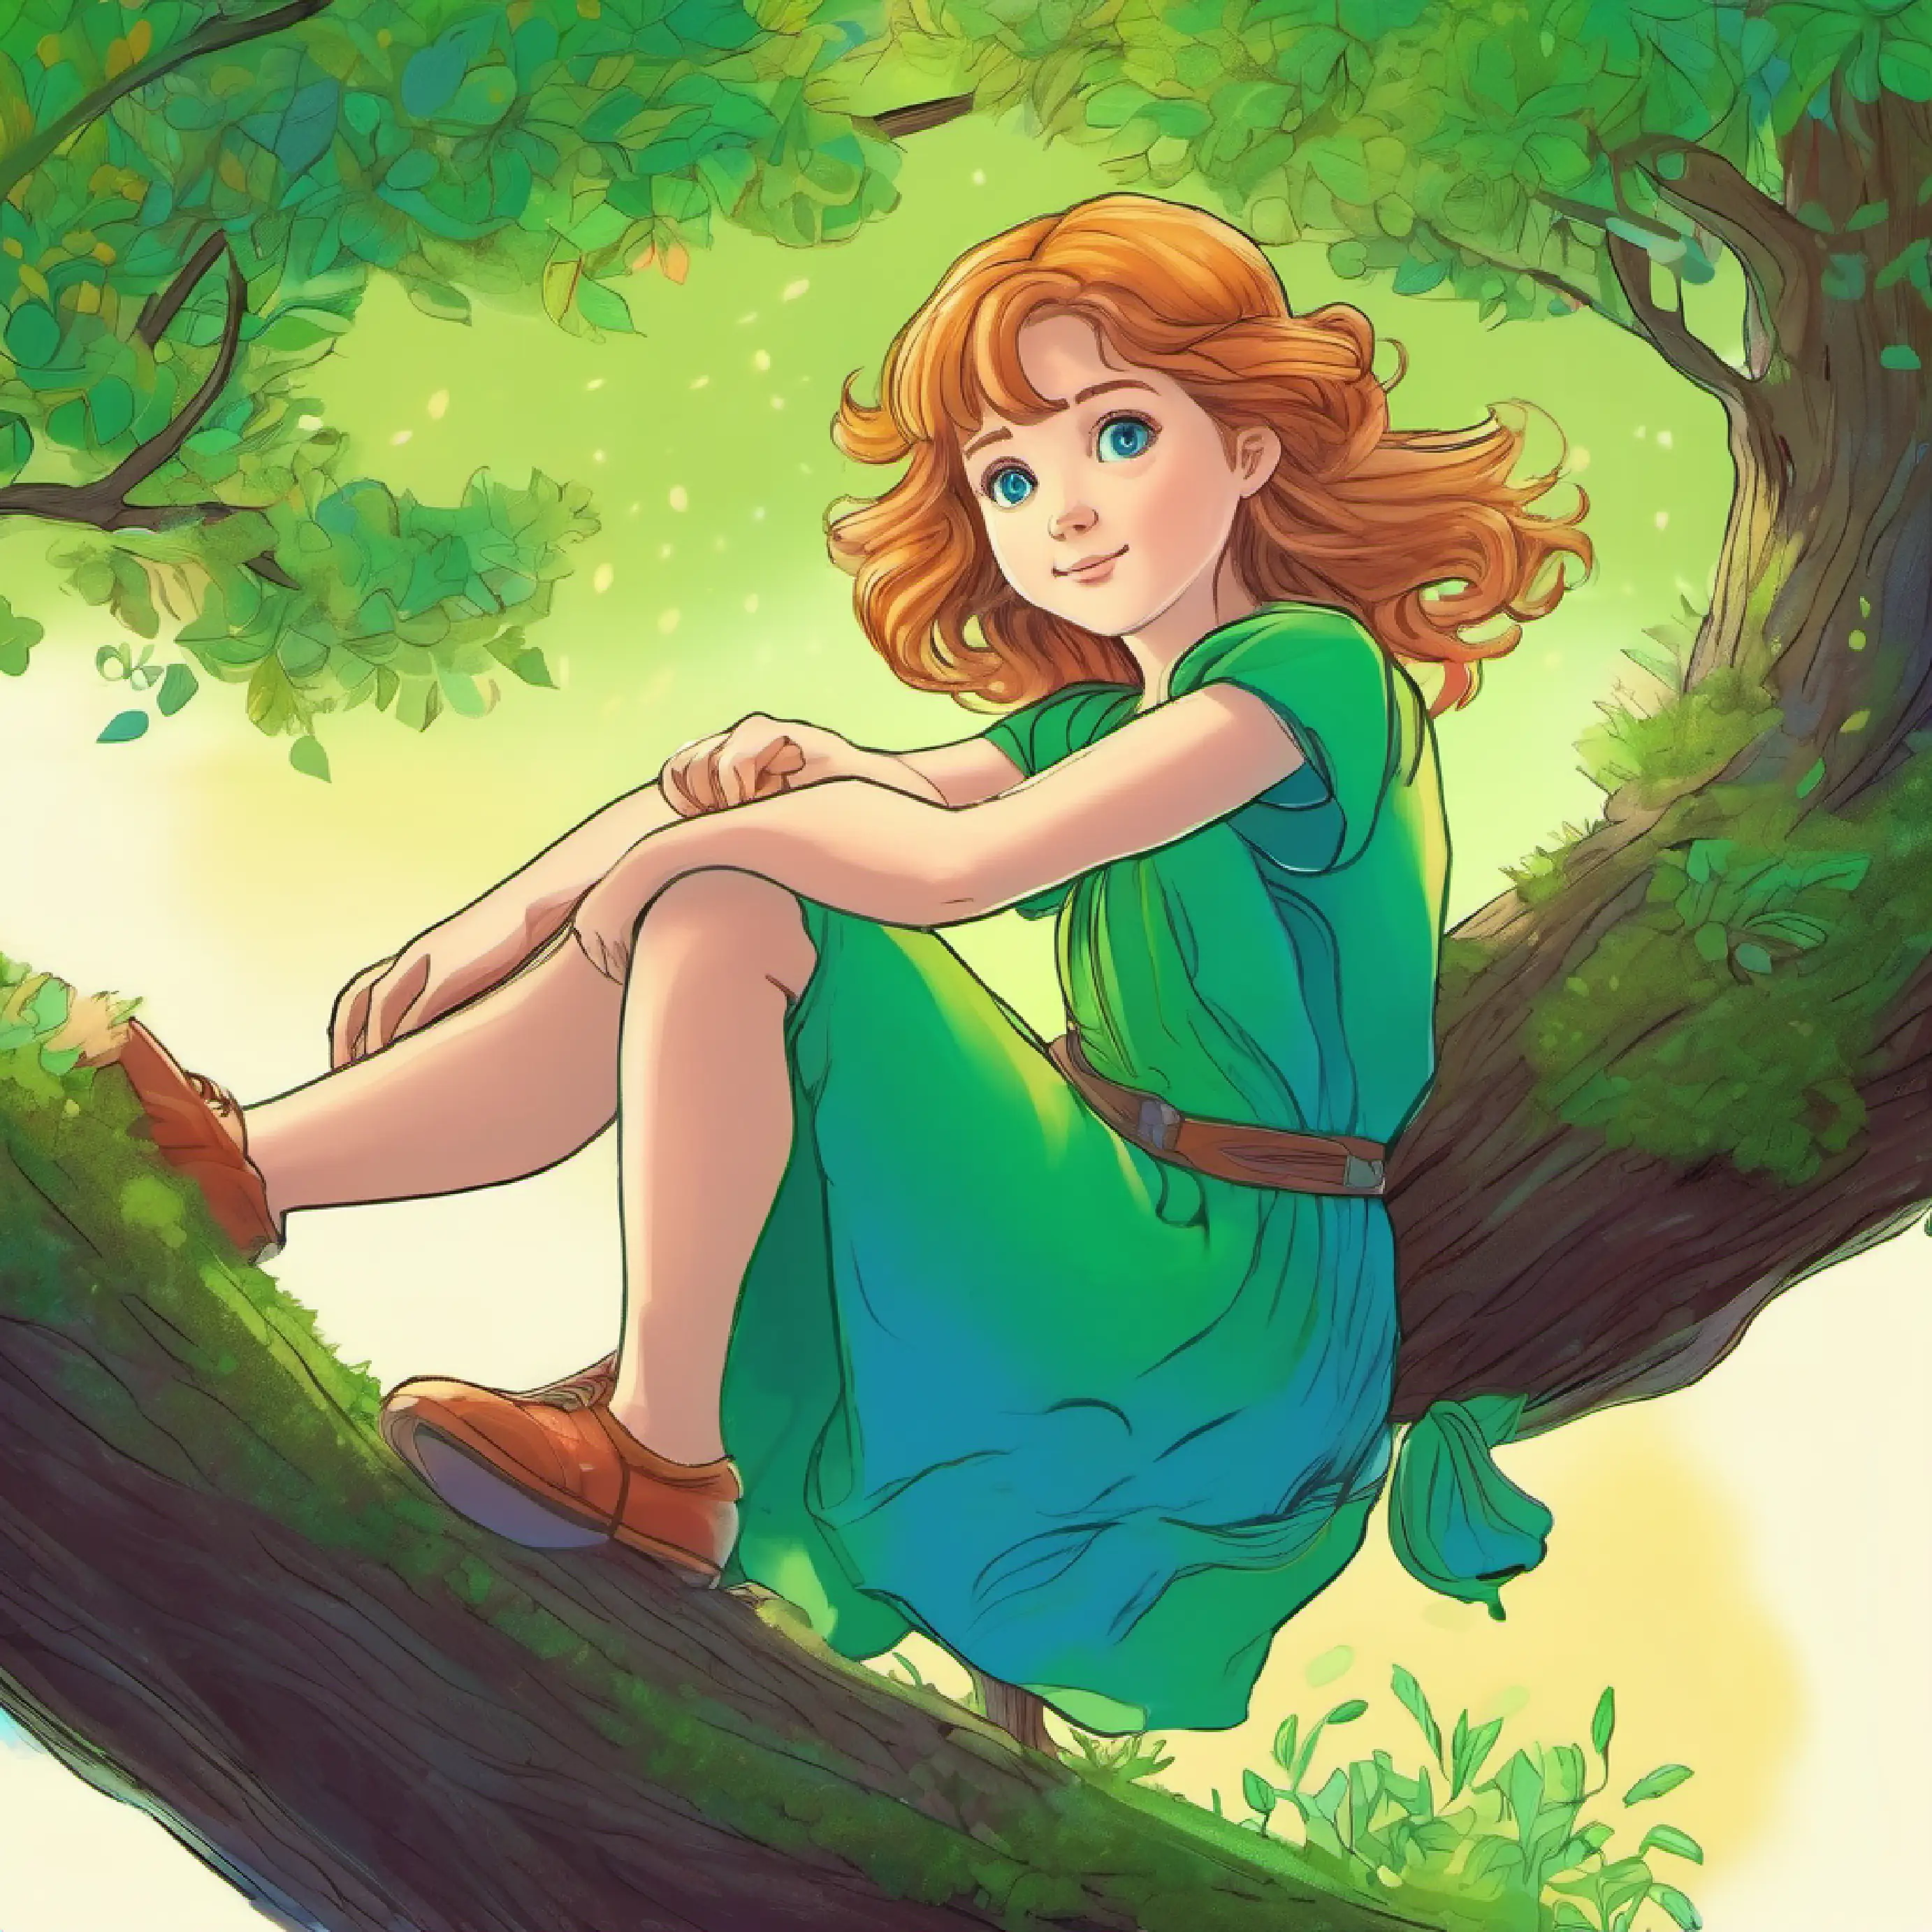 Girl with sunny hair, full of hope, bright blue eyes, wears a green dress sitting on a tree branch, a new perspective of the meadow.